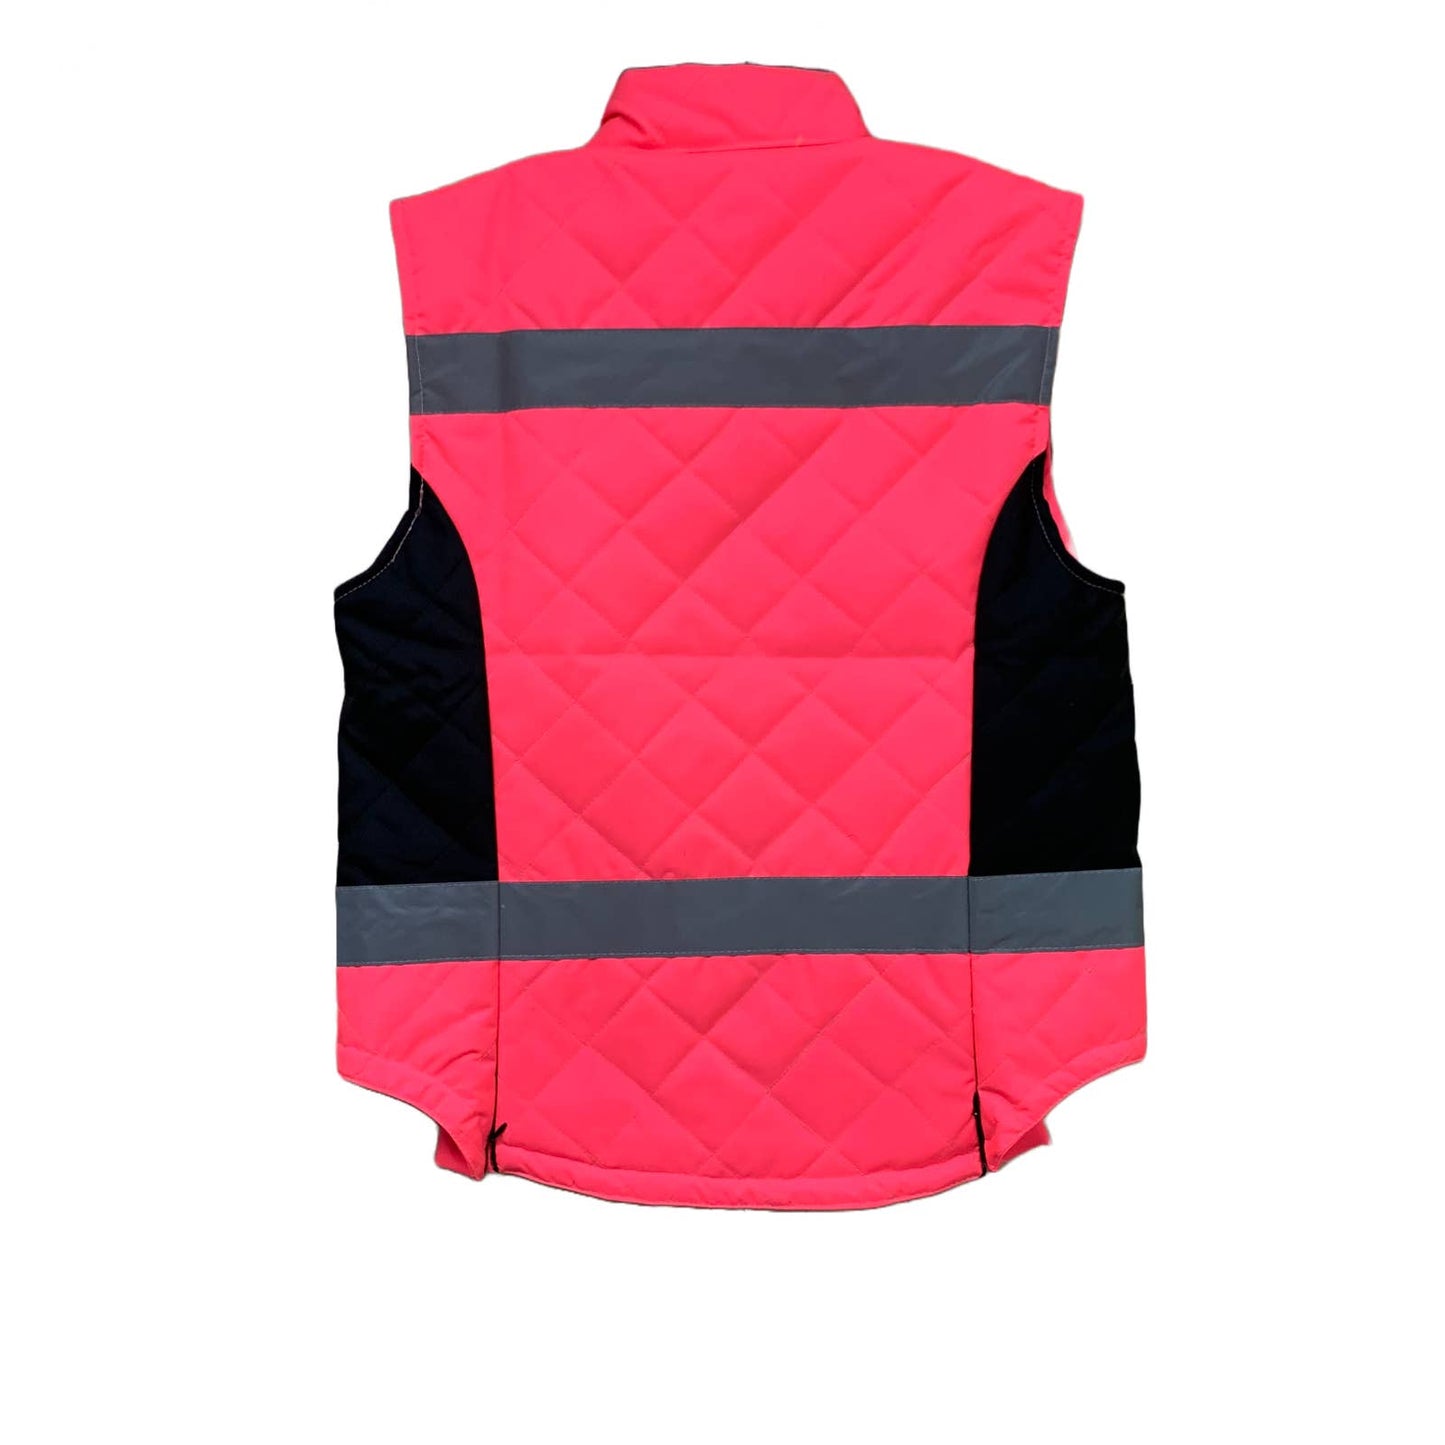 Equisafety 'Gilet' Riding Vest in Pink - Woman's X-Large